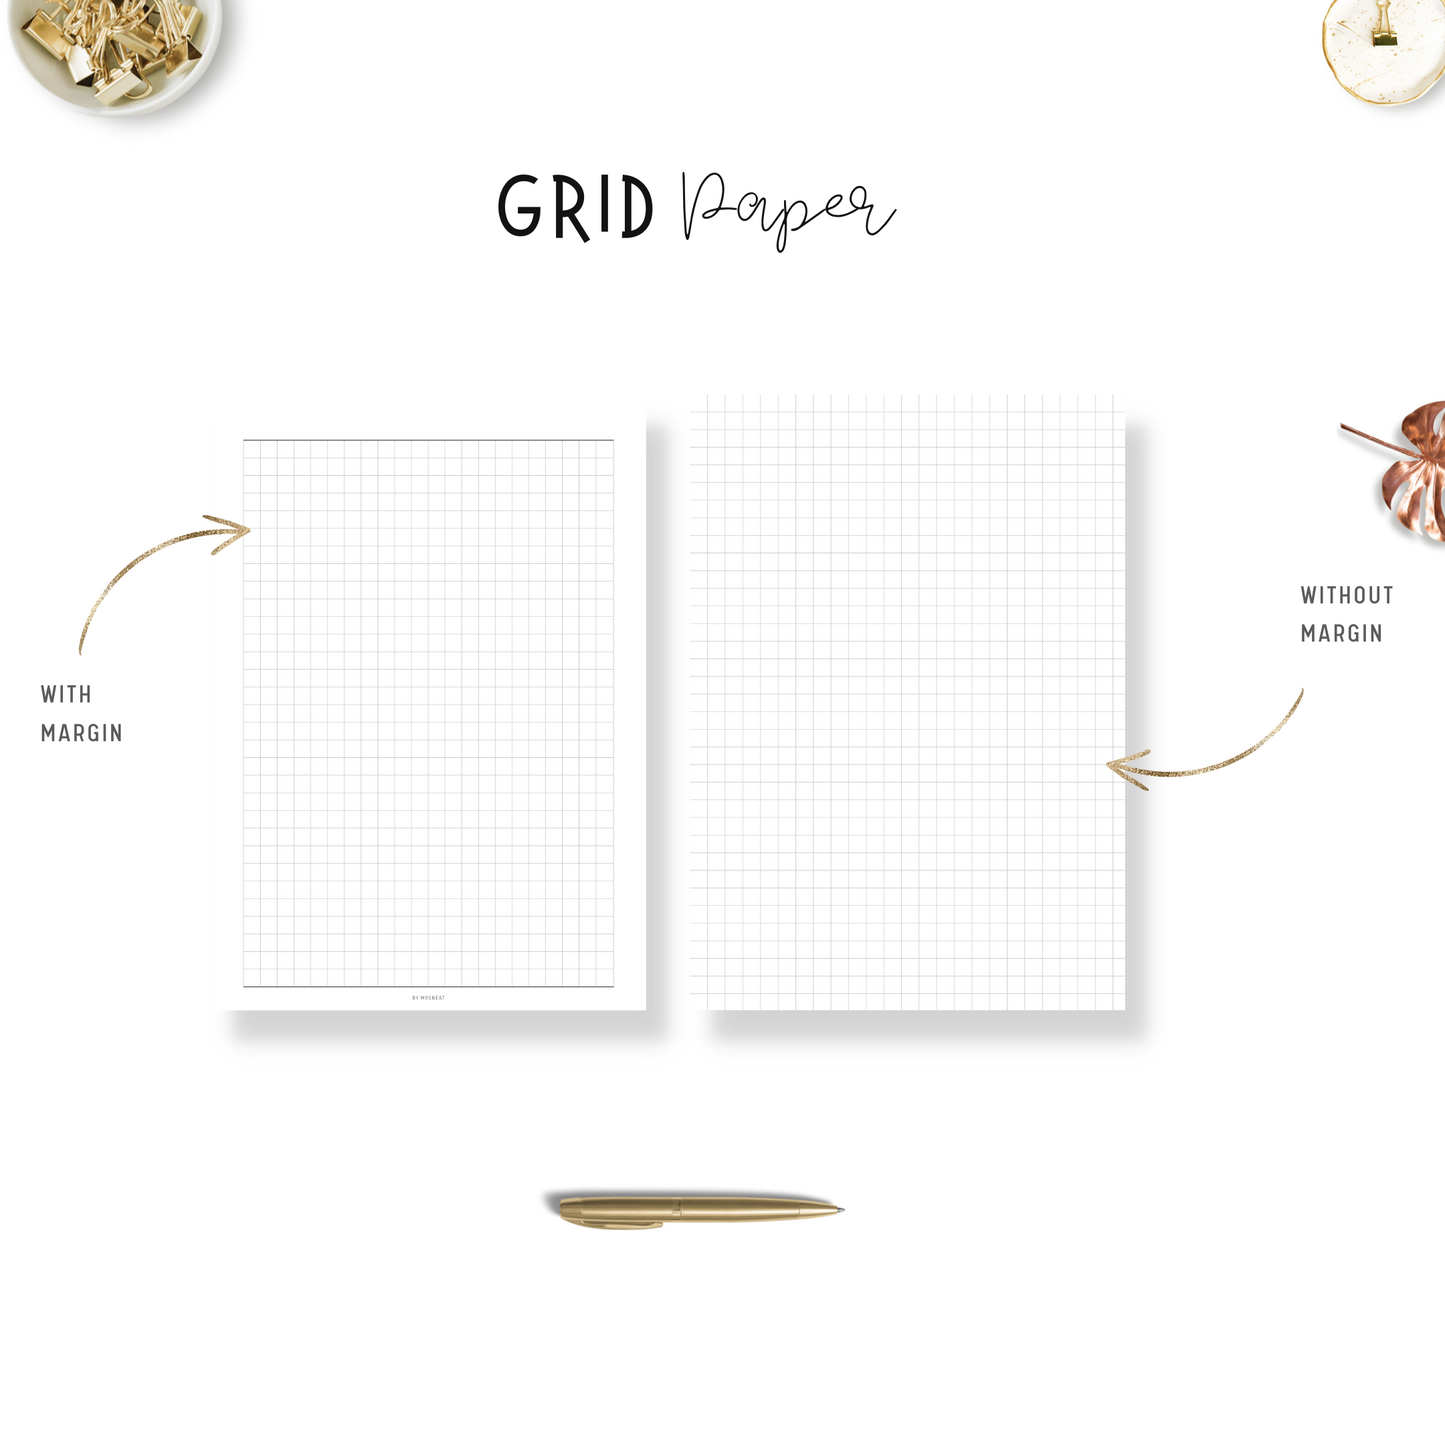 Clean and minimalist grid paper with and without margin